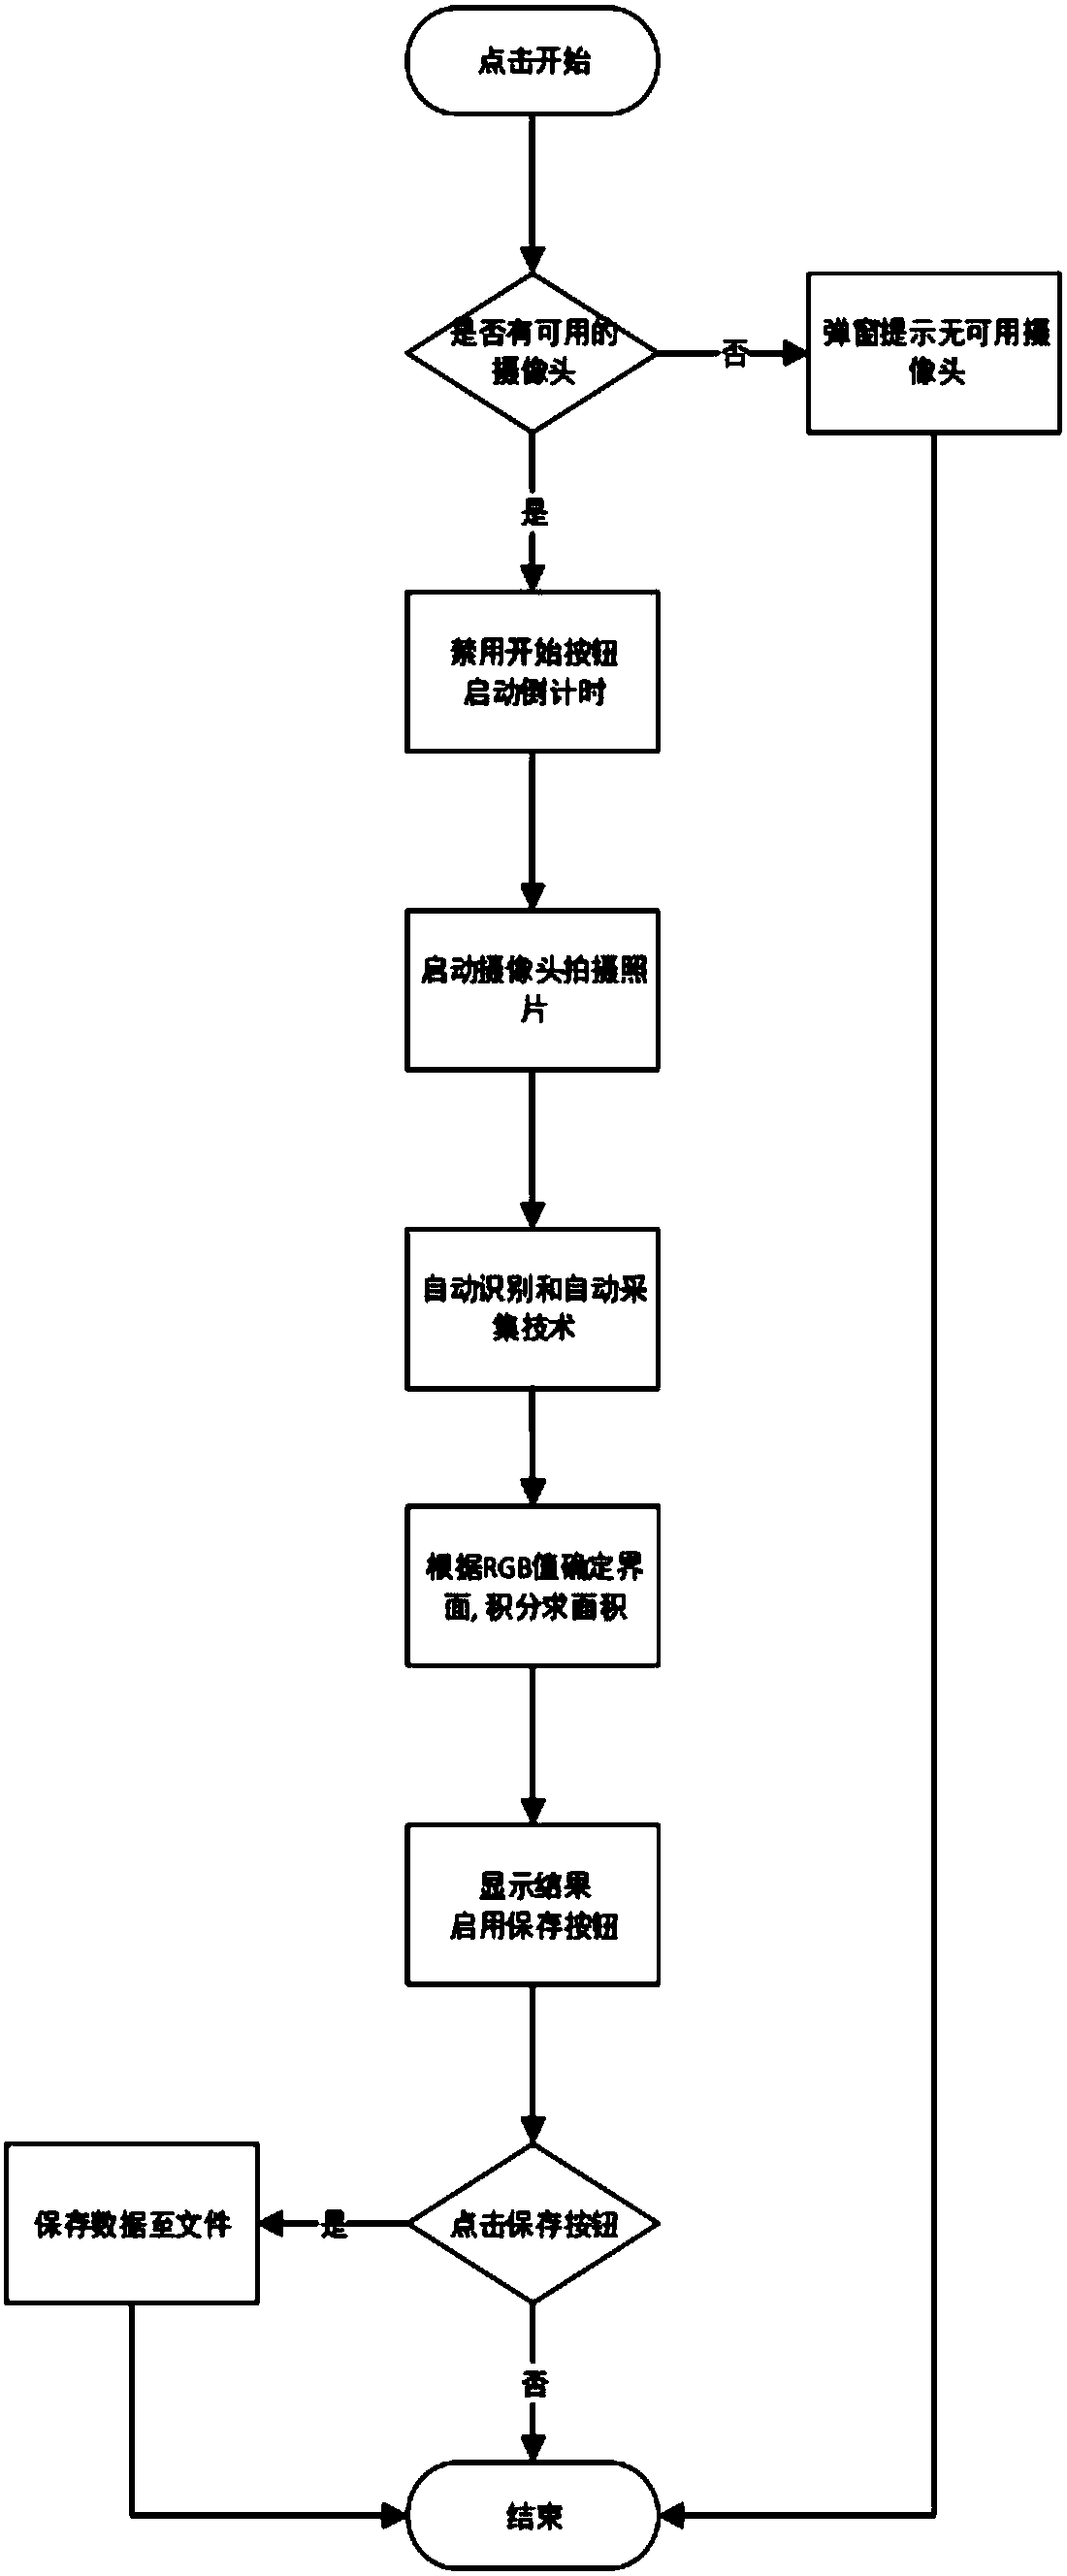 Method for rapidly determining proportion of gypsum, limestone and smoke dust in desulfurization circulating slurry